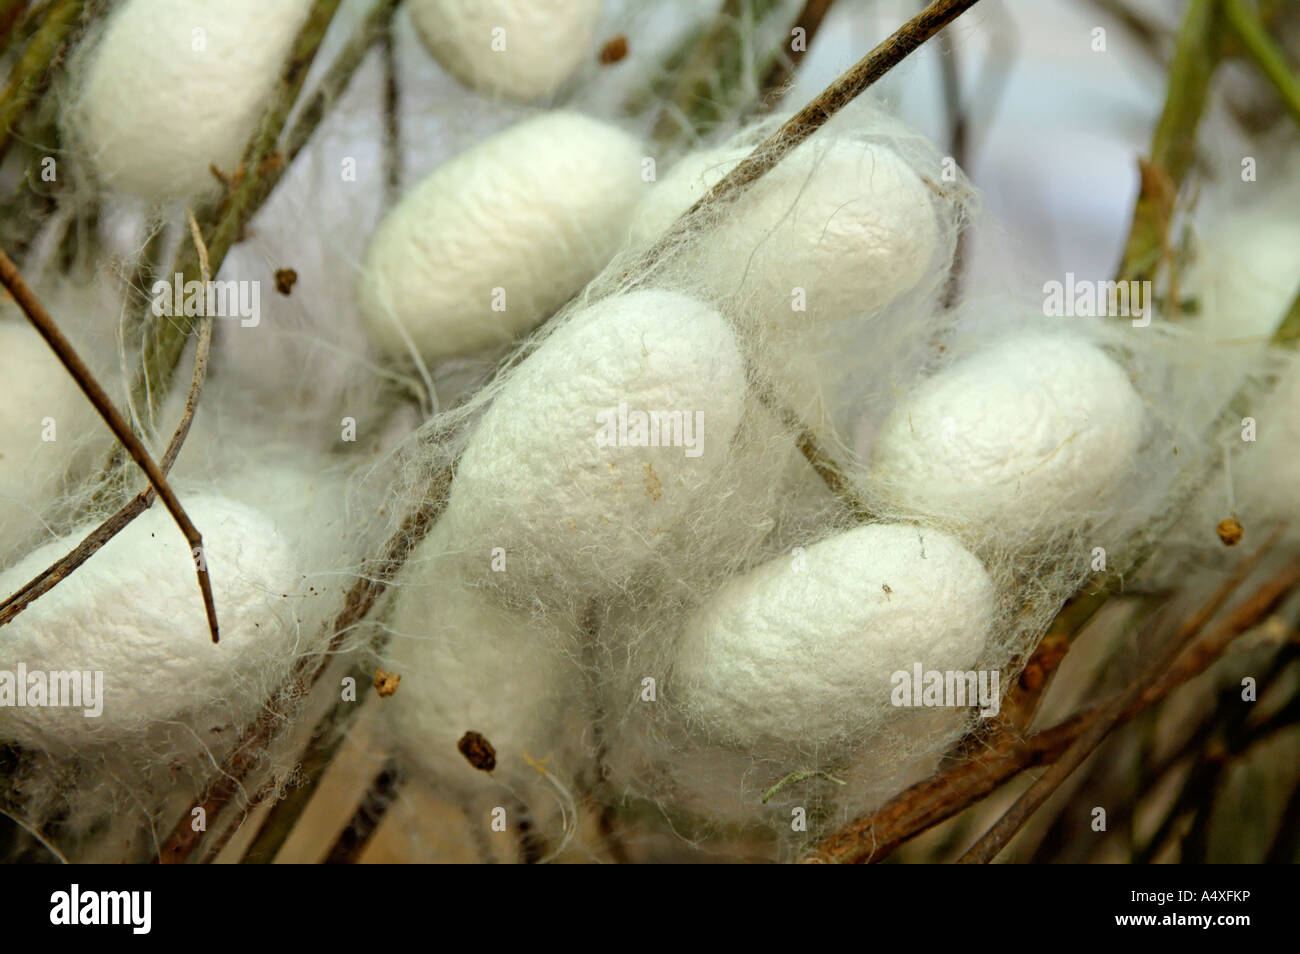 Cocoons of the Bombyx mori silk worm Stock Photo